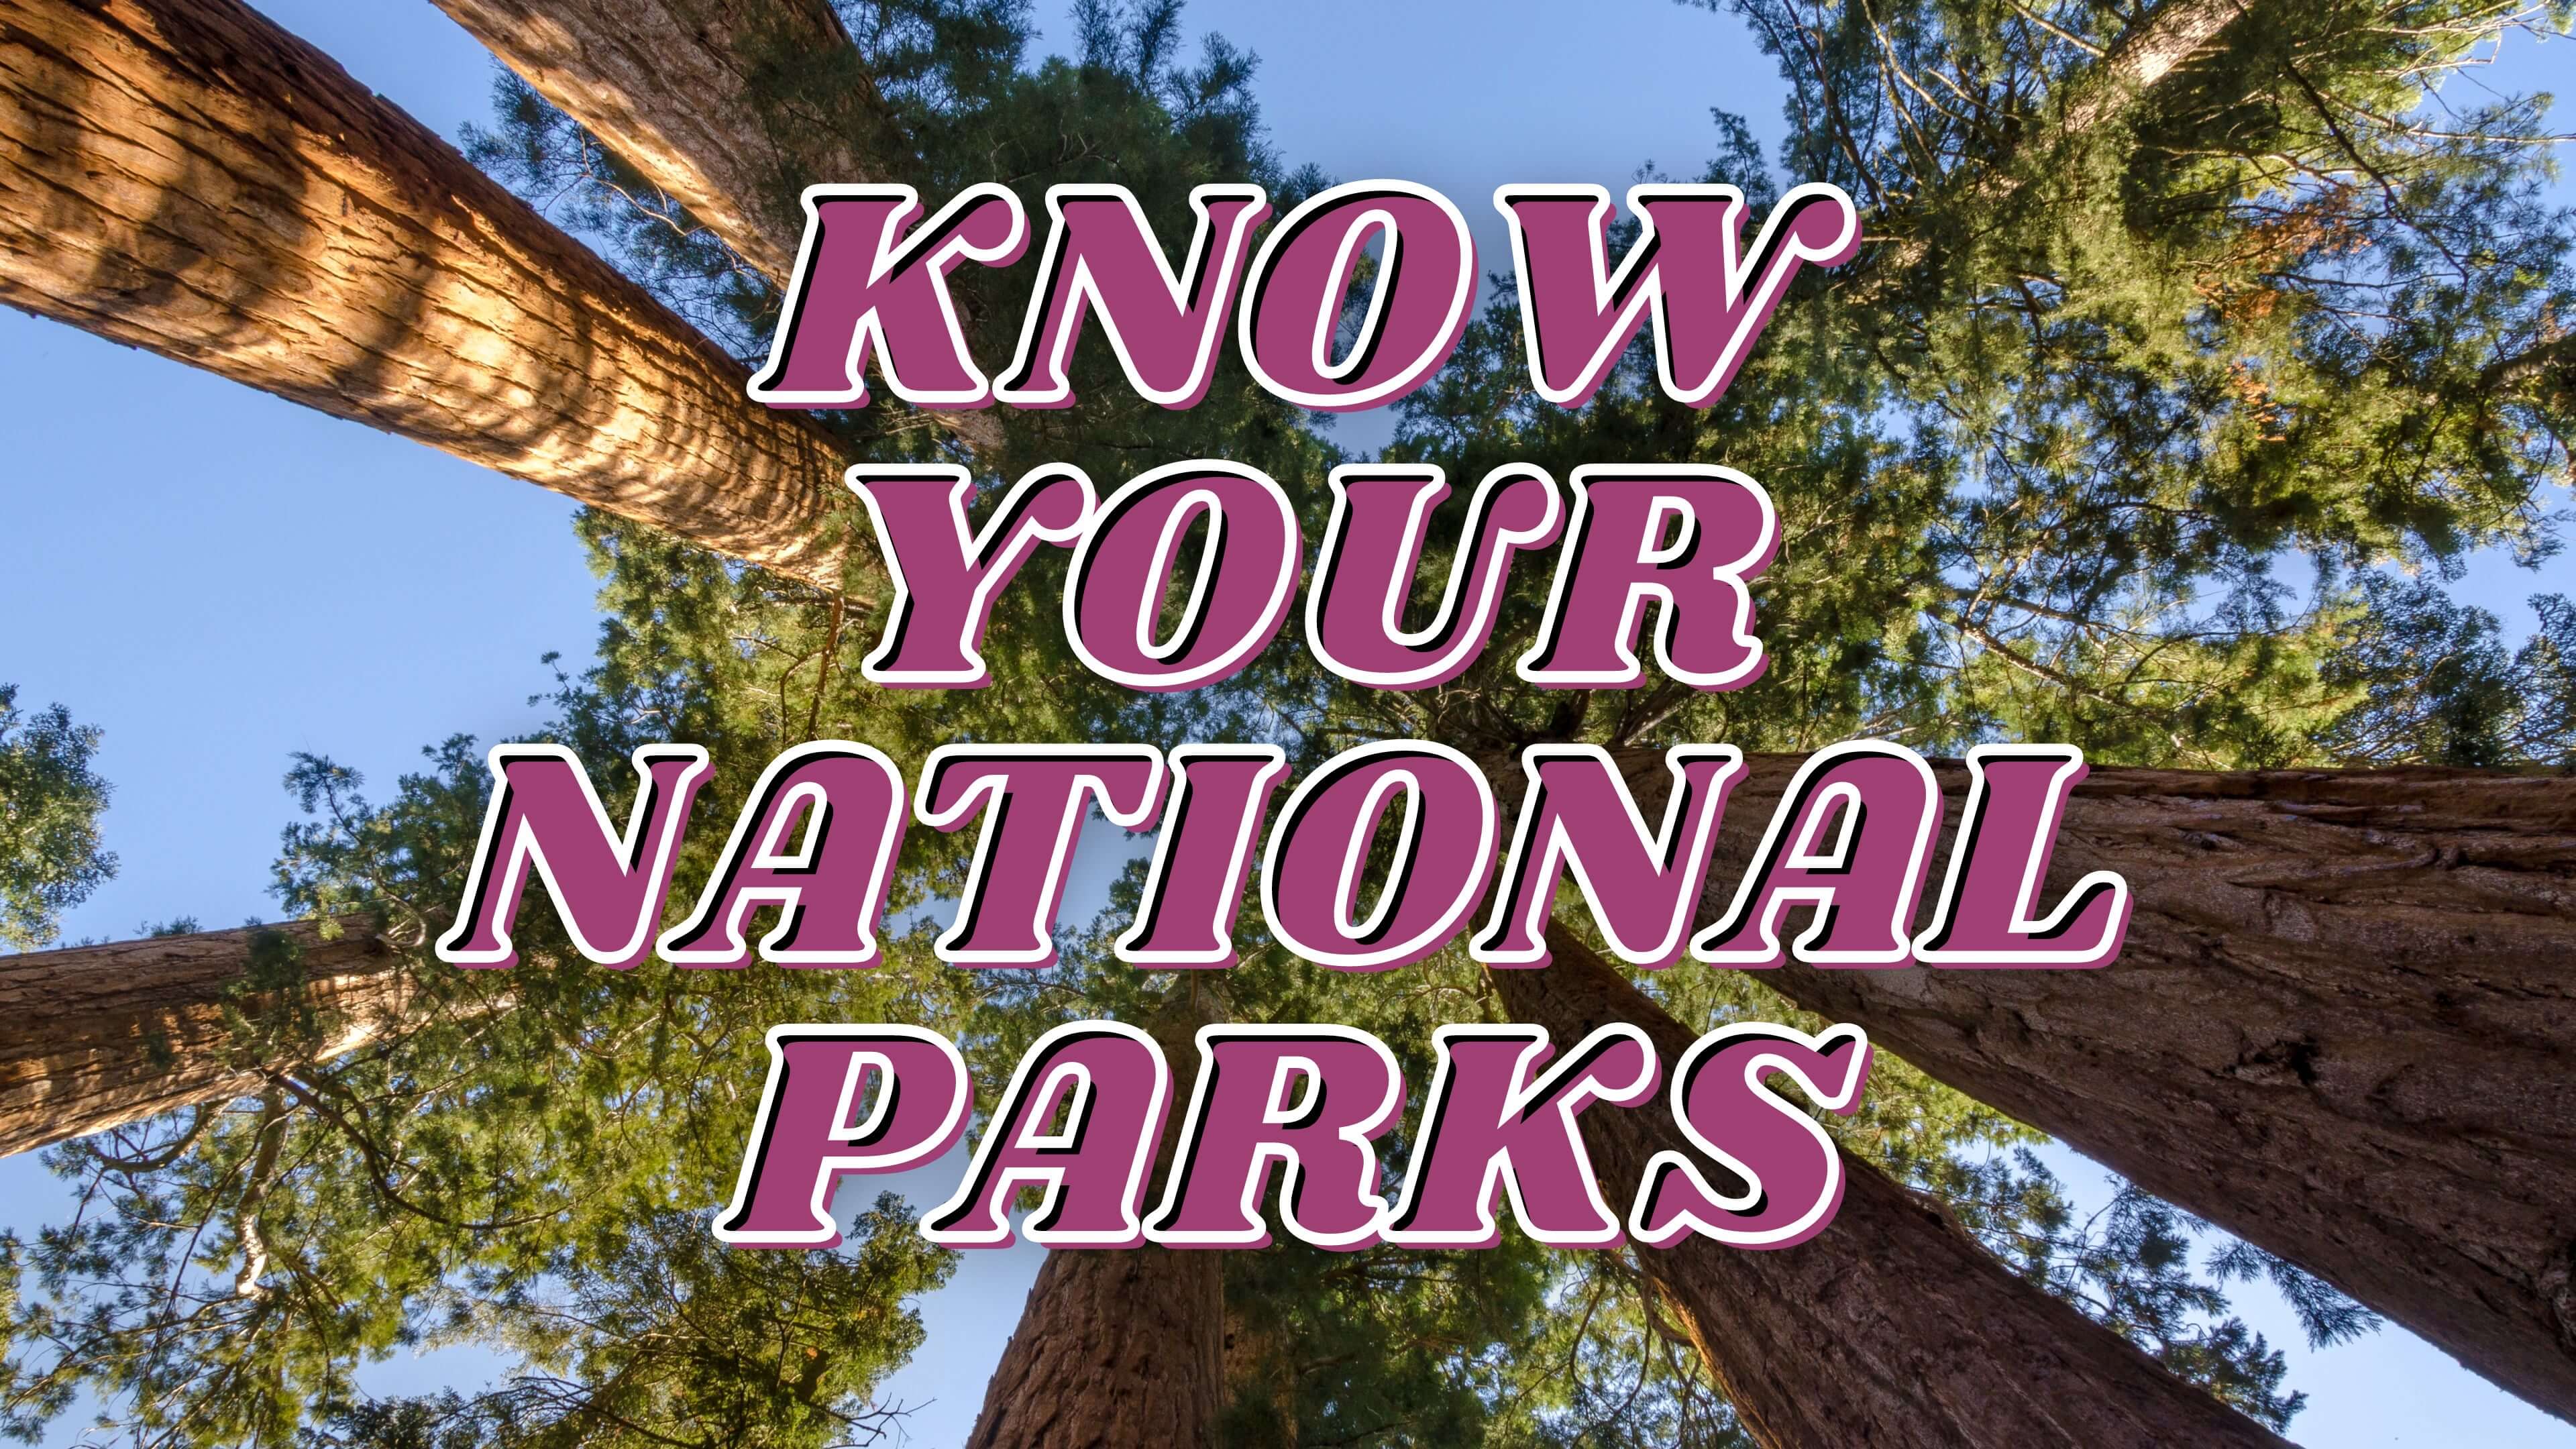 Know Your National Parks